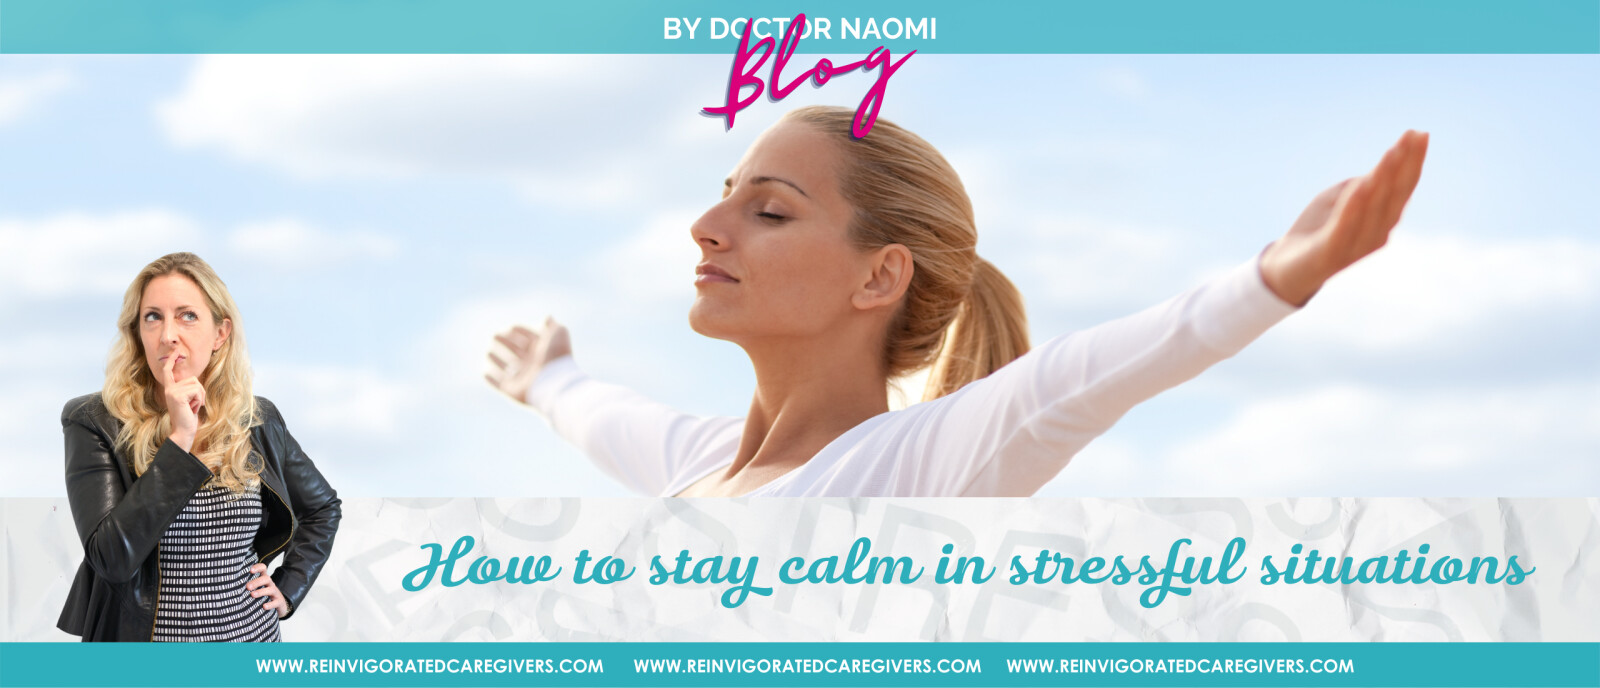 How to stay calm in stressful situations